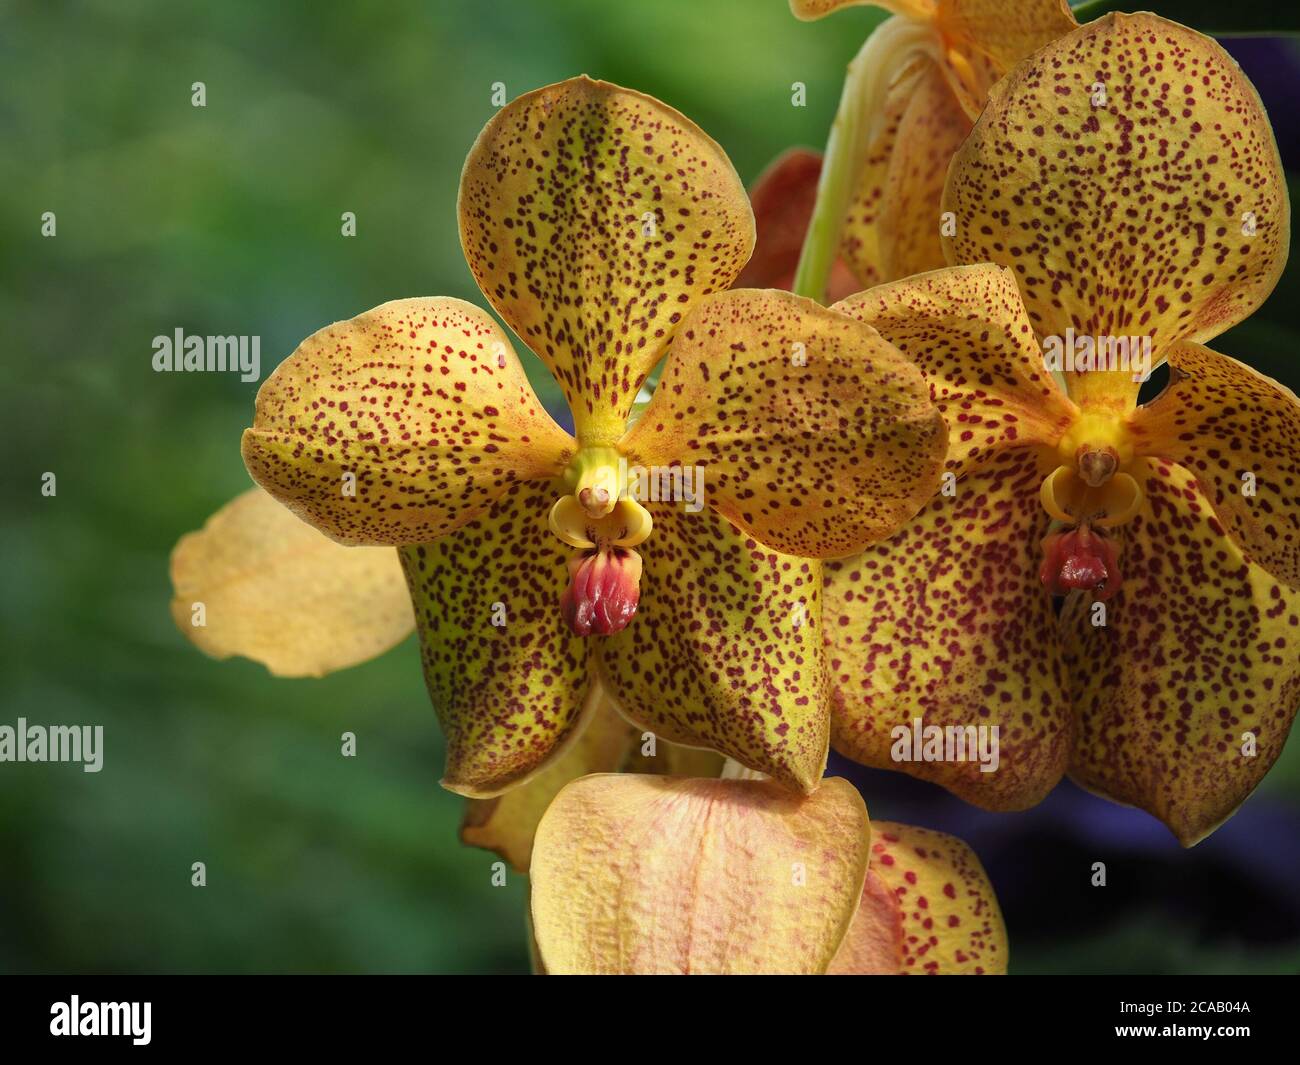 fantastic colourful display of exotic tropical orchid flowers with delicate purple tiny spots on golden petals & sepals Stock Photo